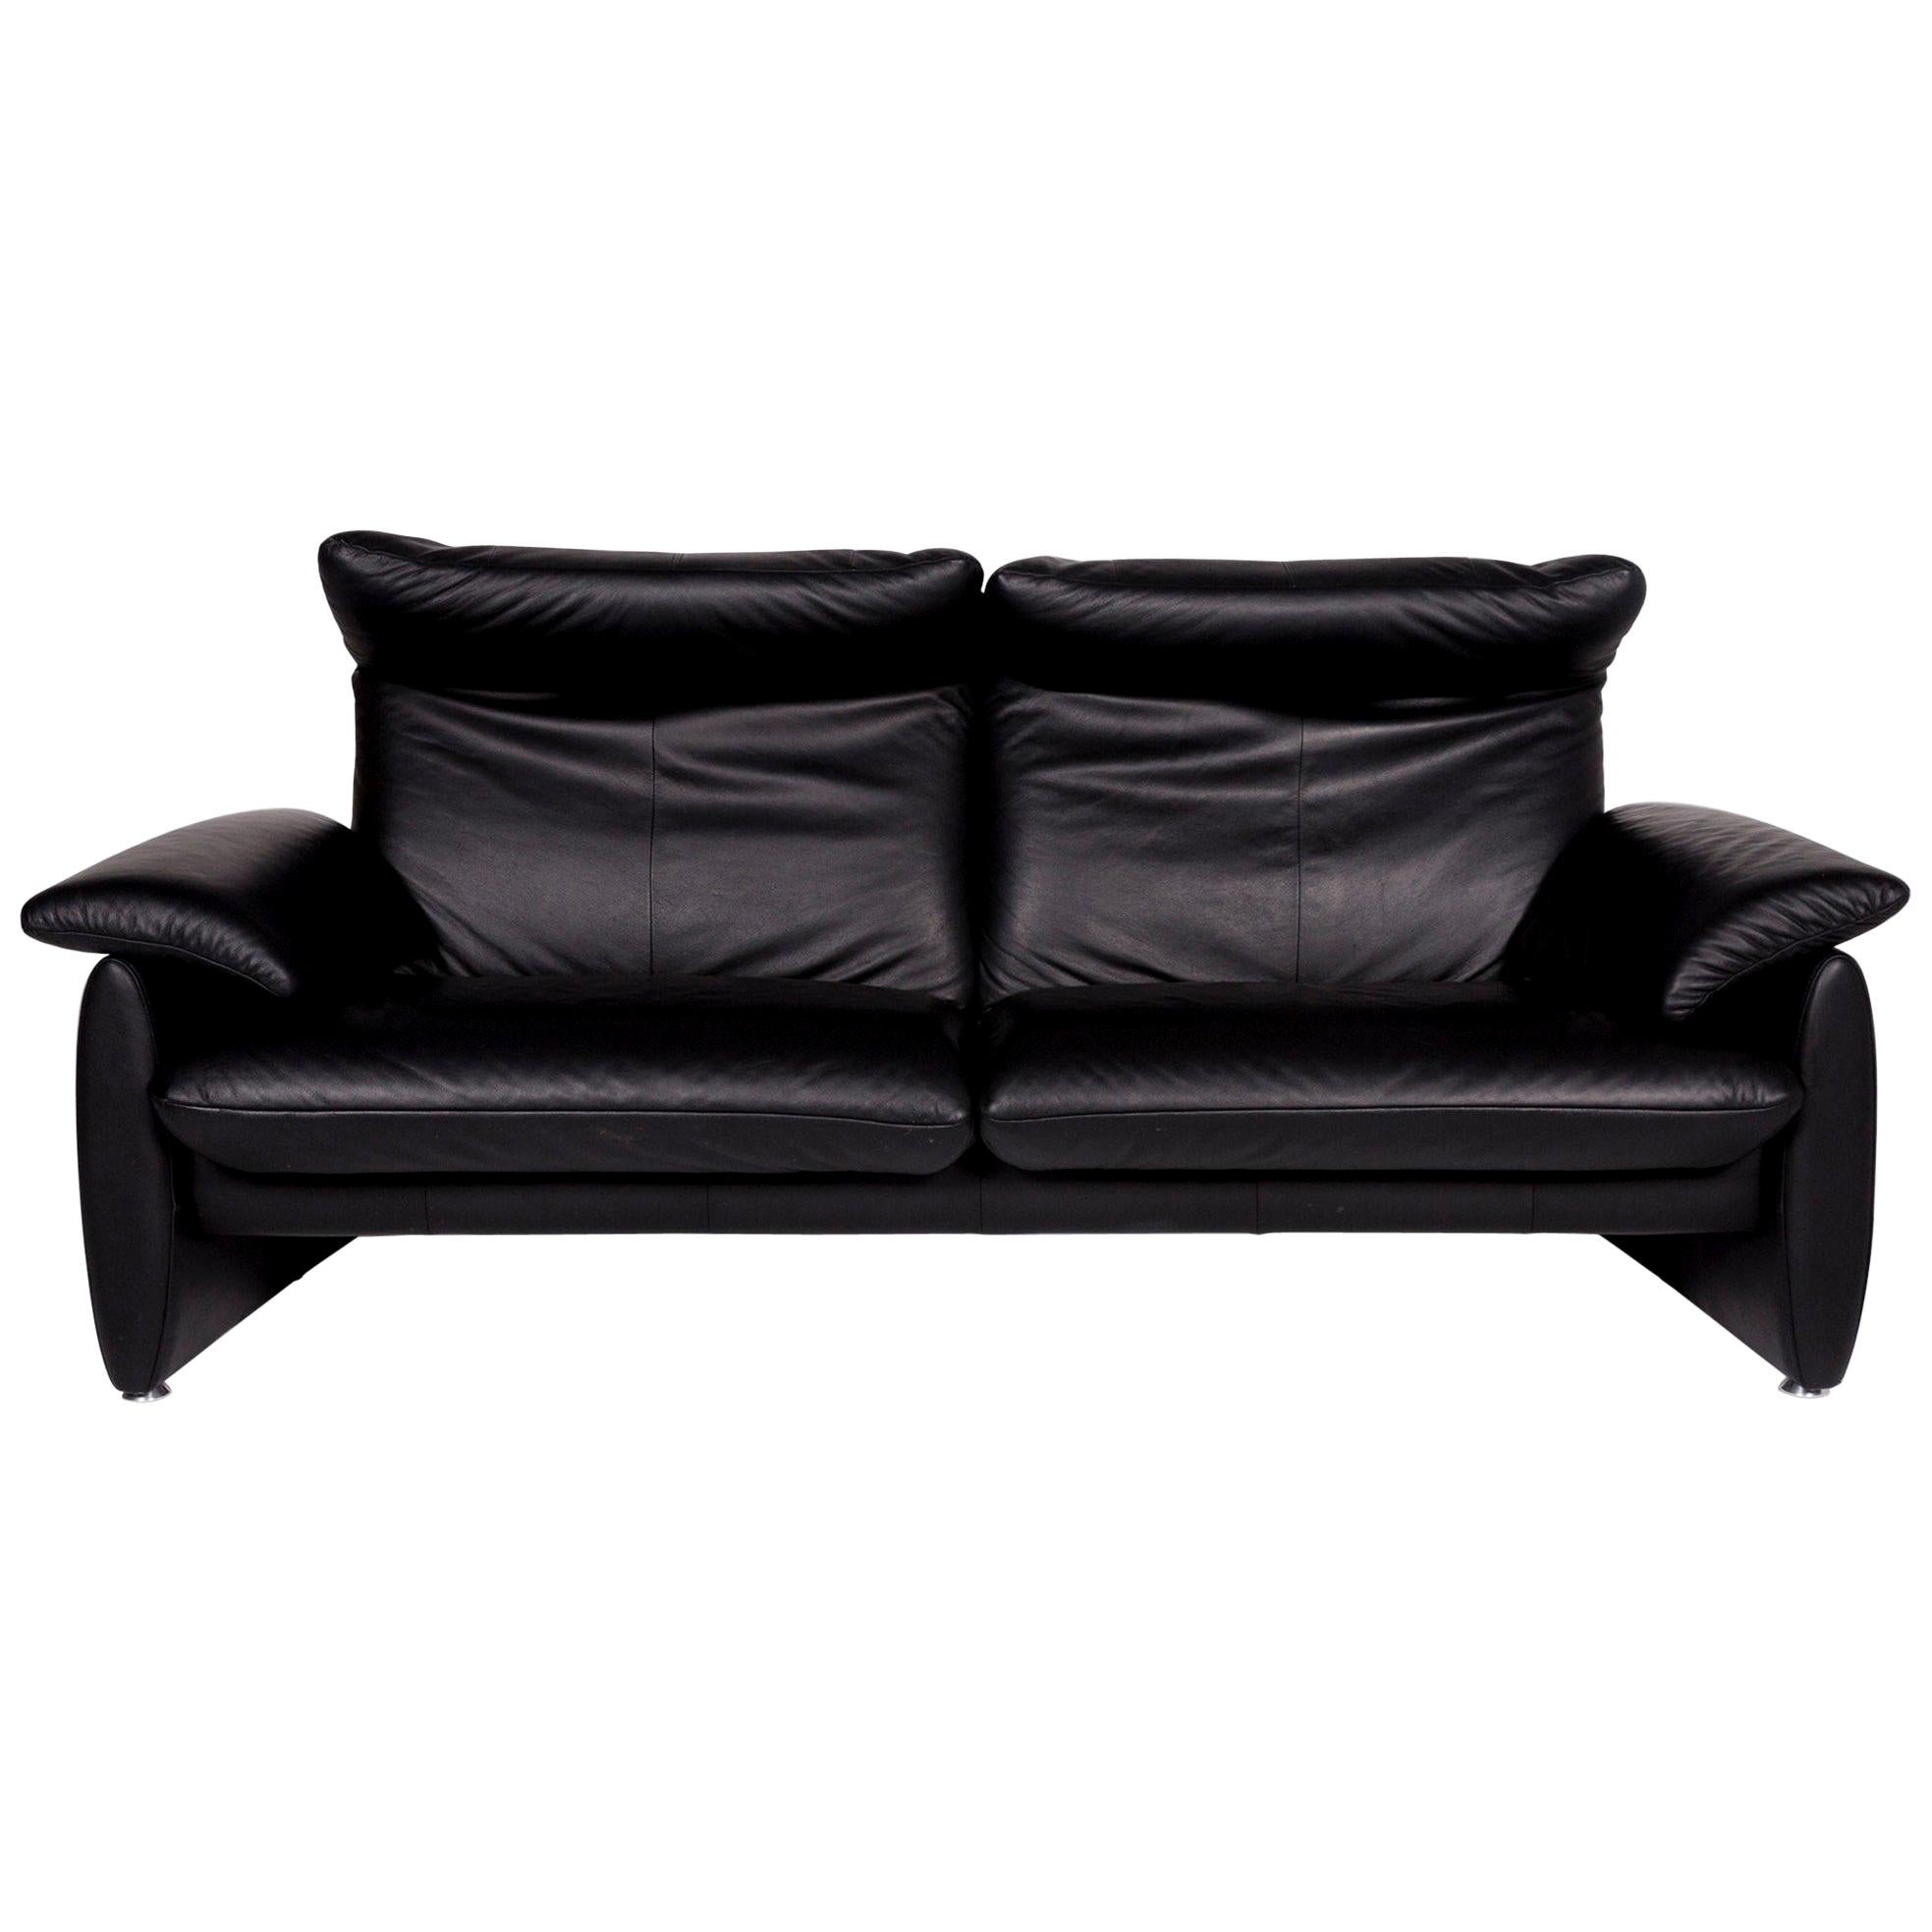 Laauser Leather Sofa Black Two-Seat Function Couch For Sale